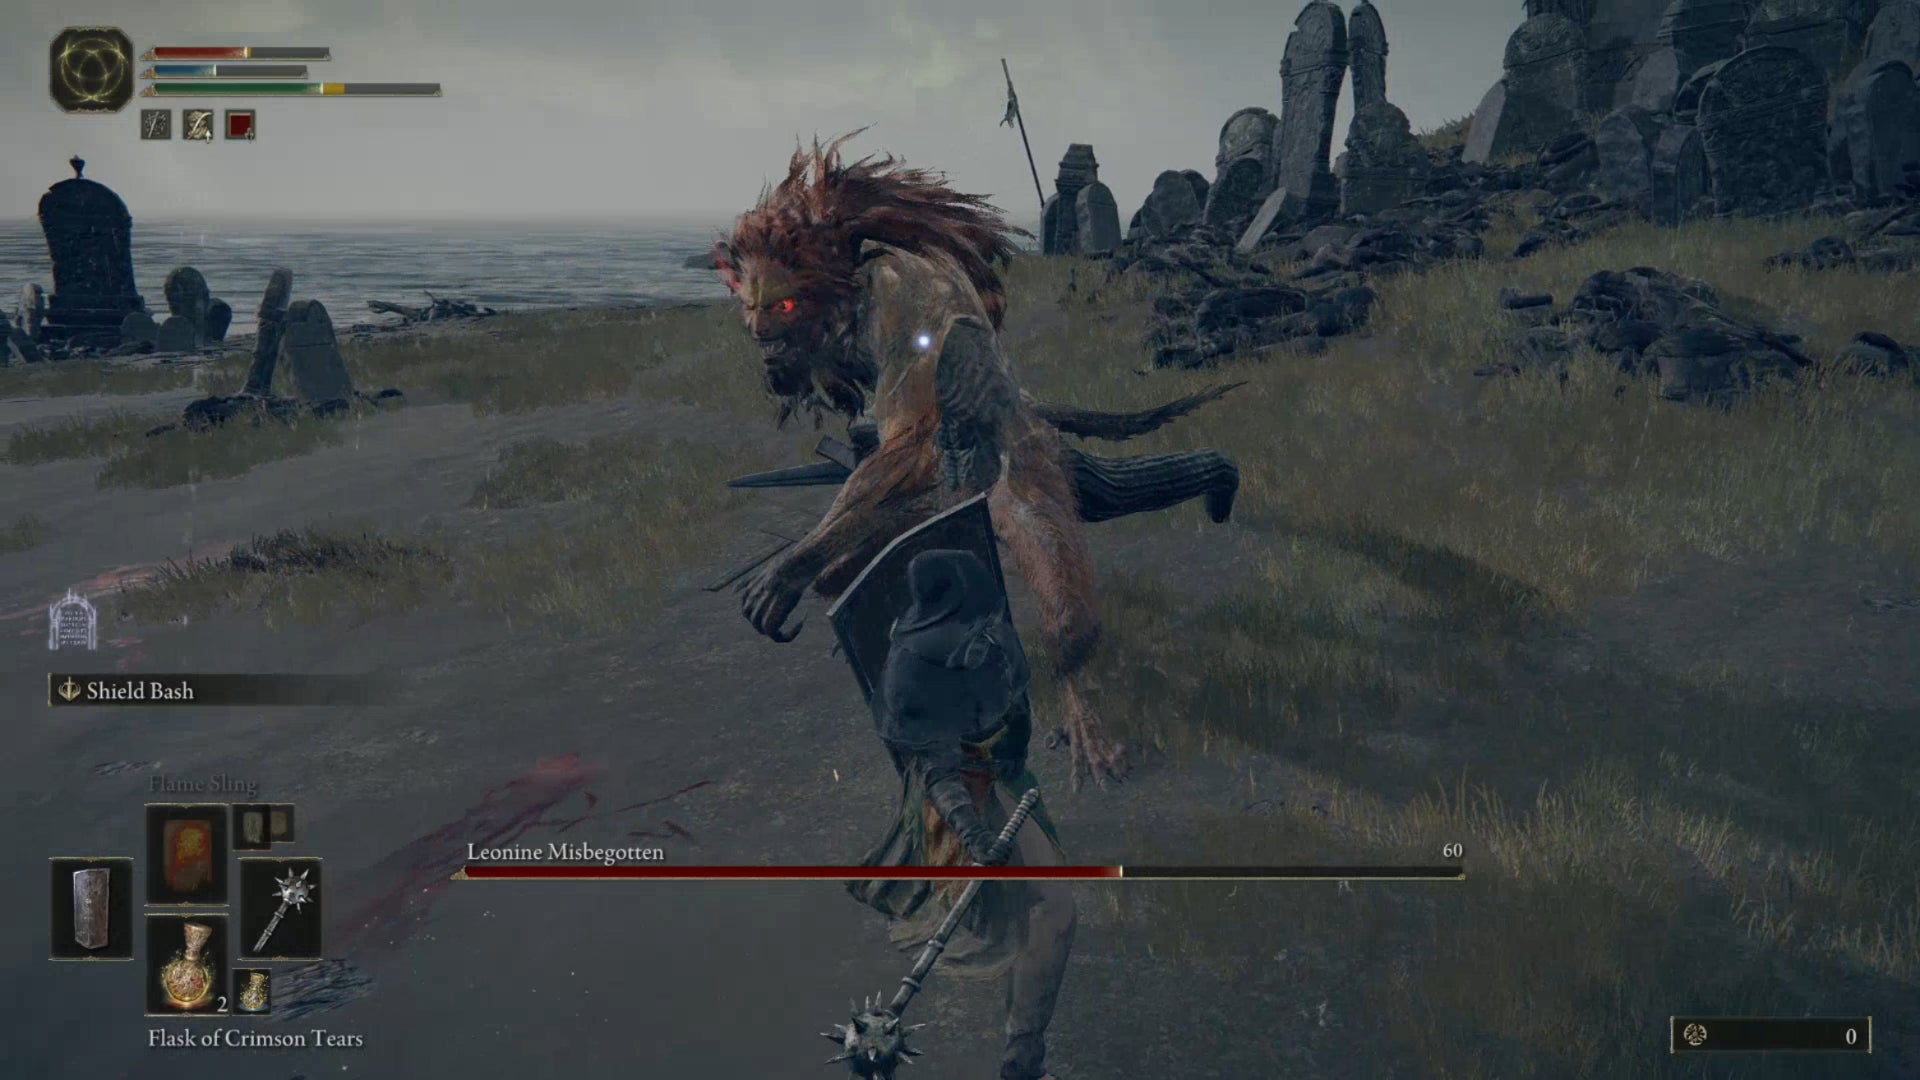 The player in Elden Ring faces down the boss Leonine Misbegotten with a tower shield.